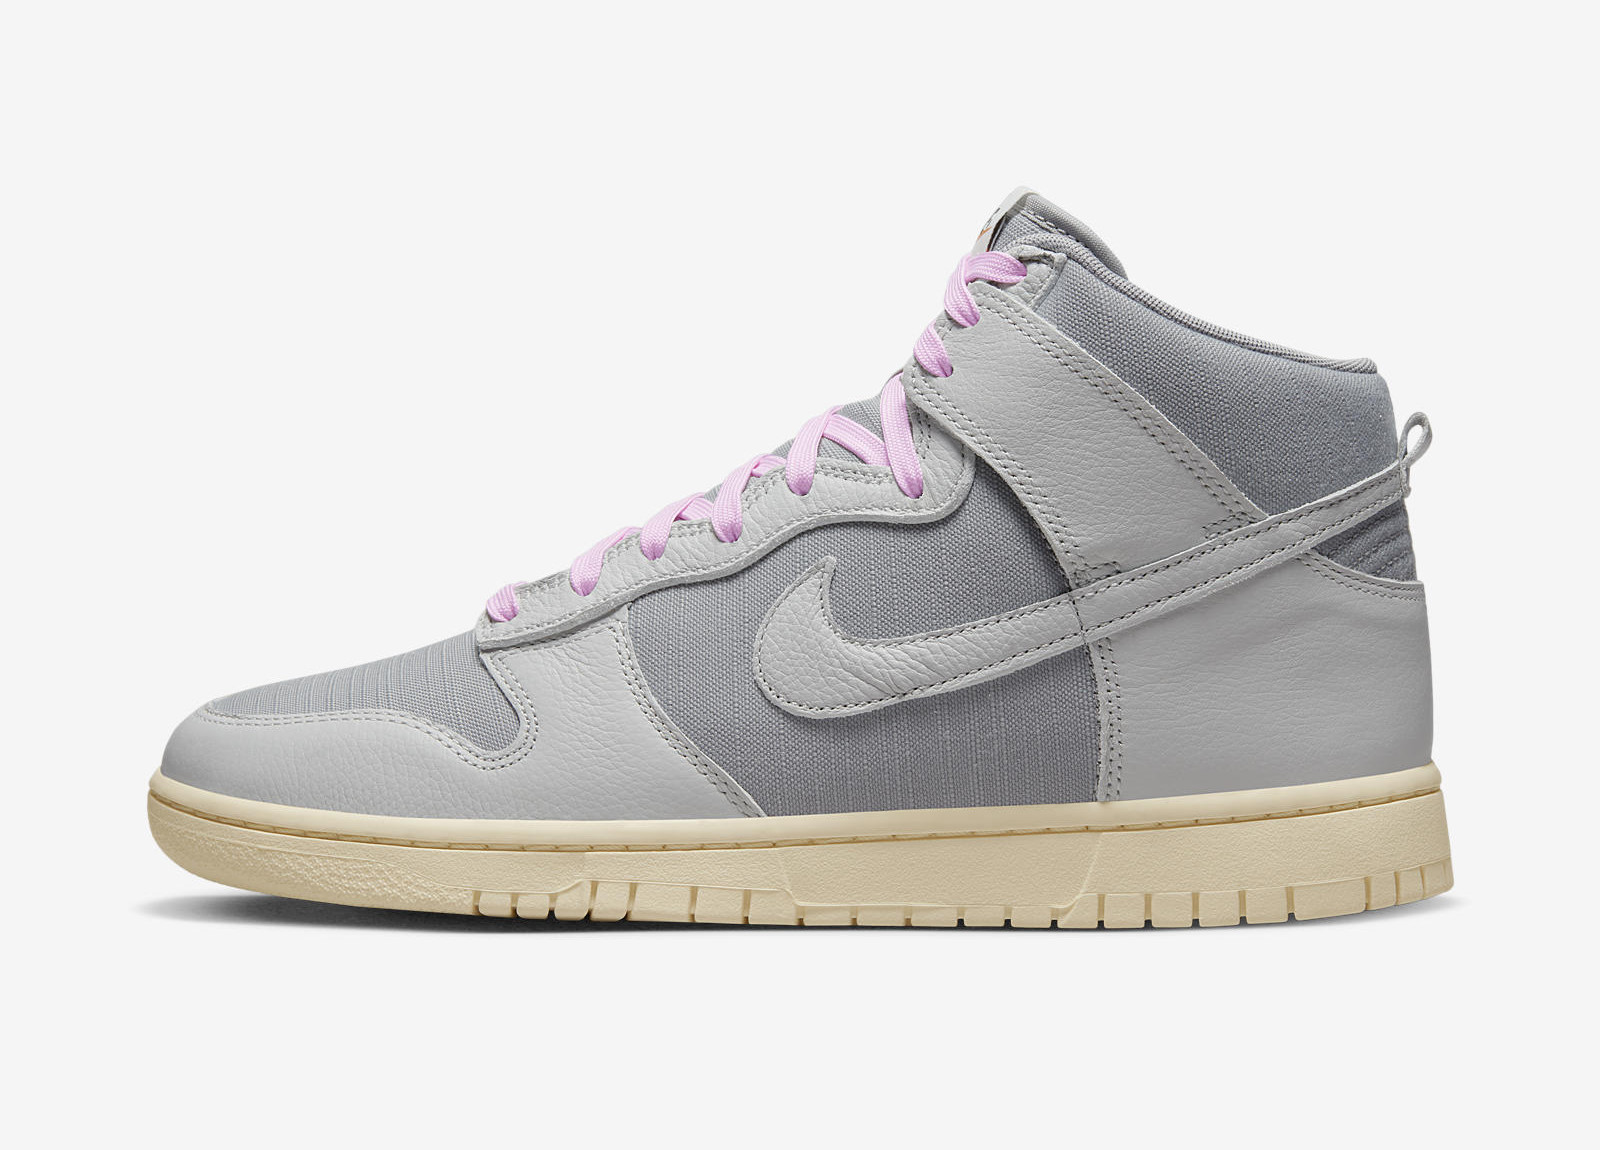 Nike Dunk High
« Particle Grey »